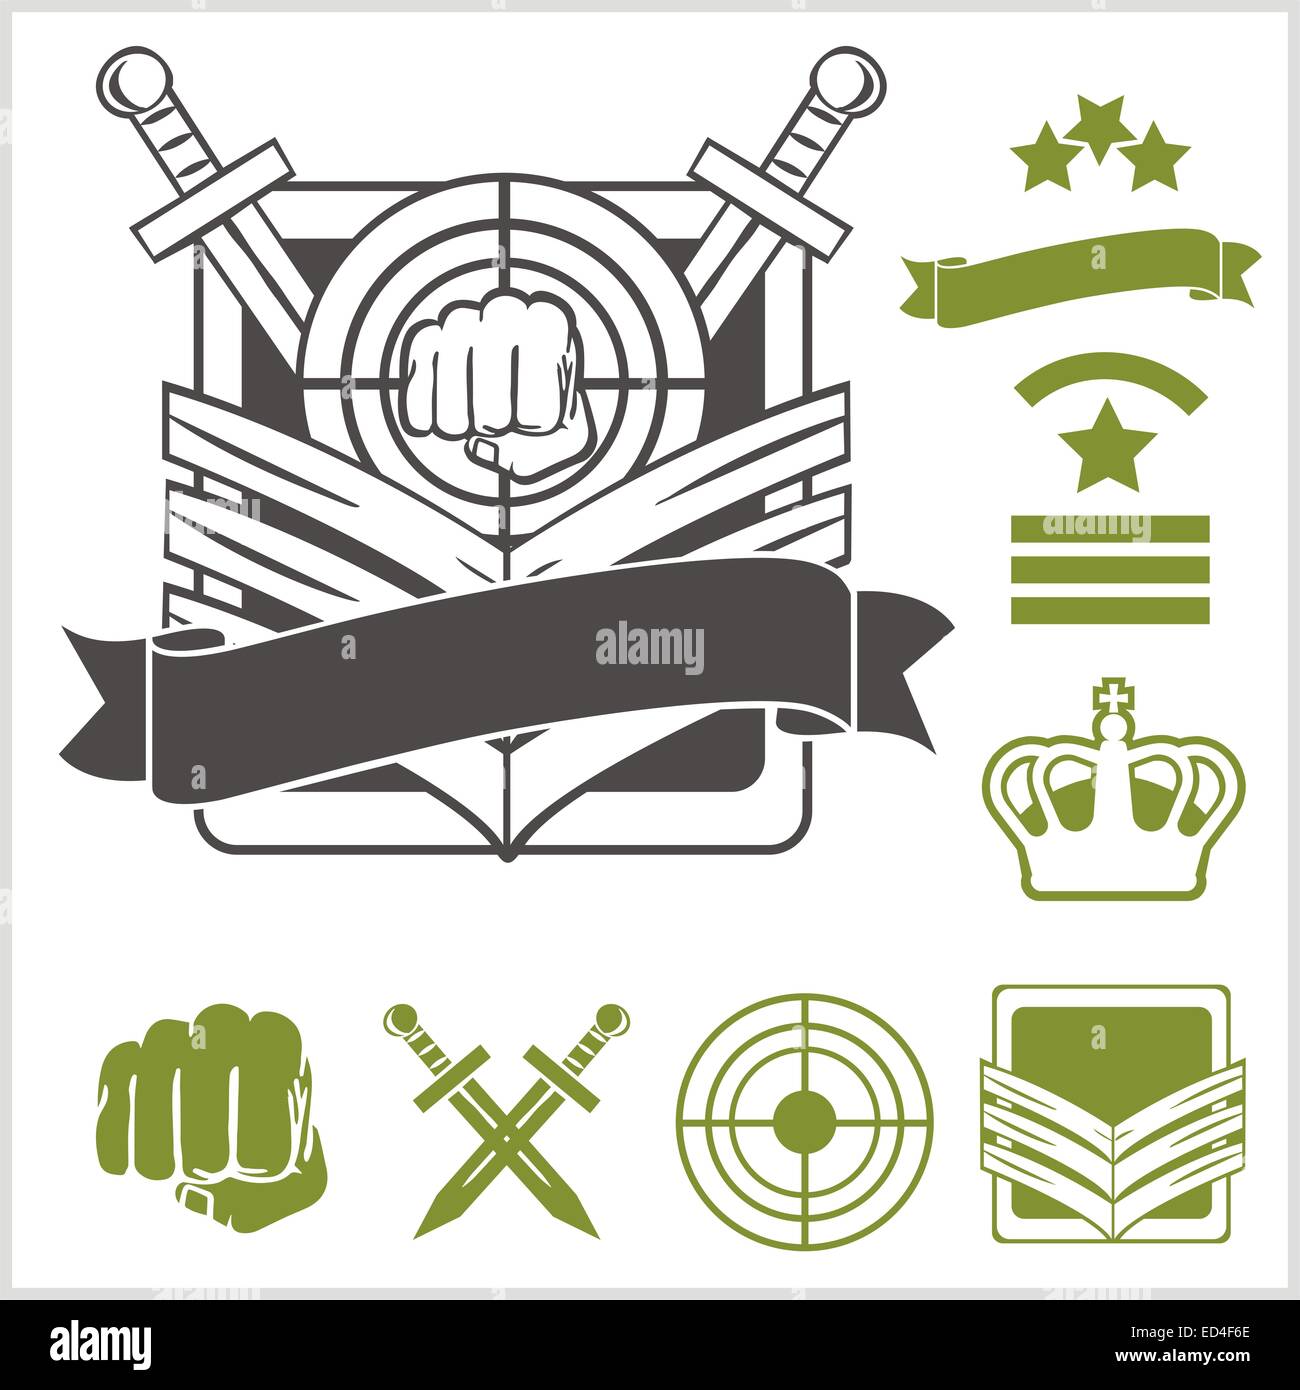 Special forces patch set - stock Stock Photo